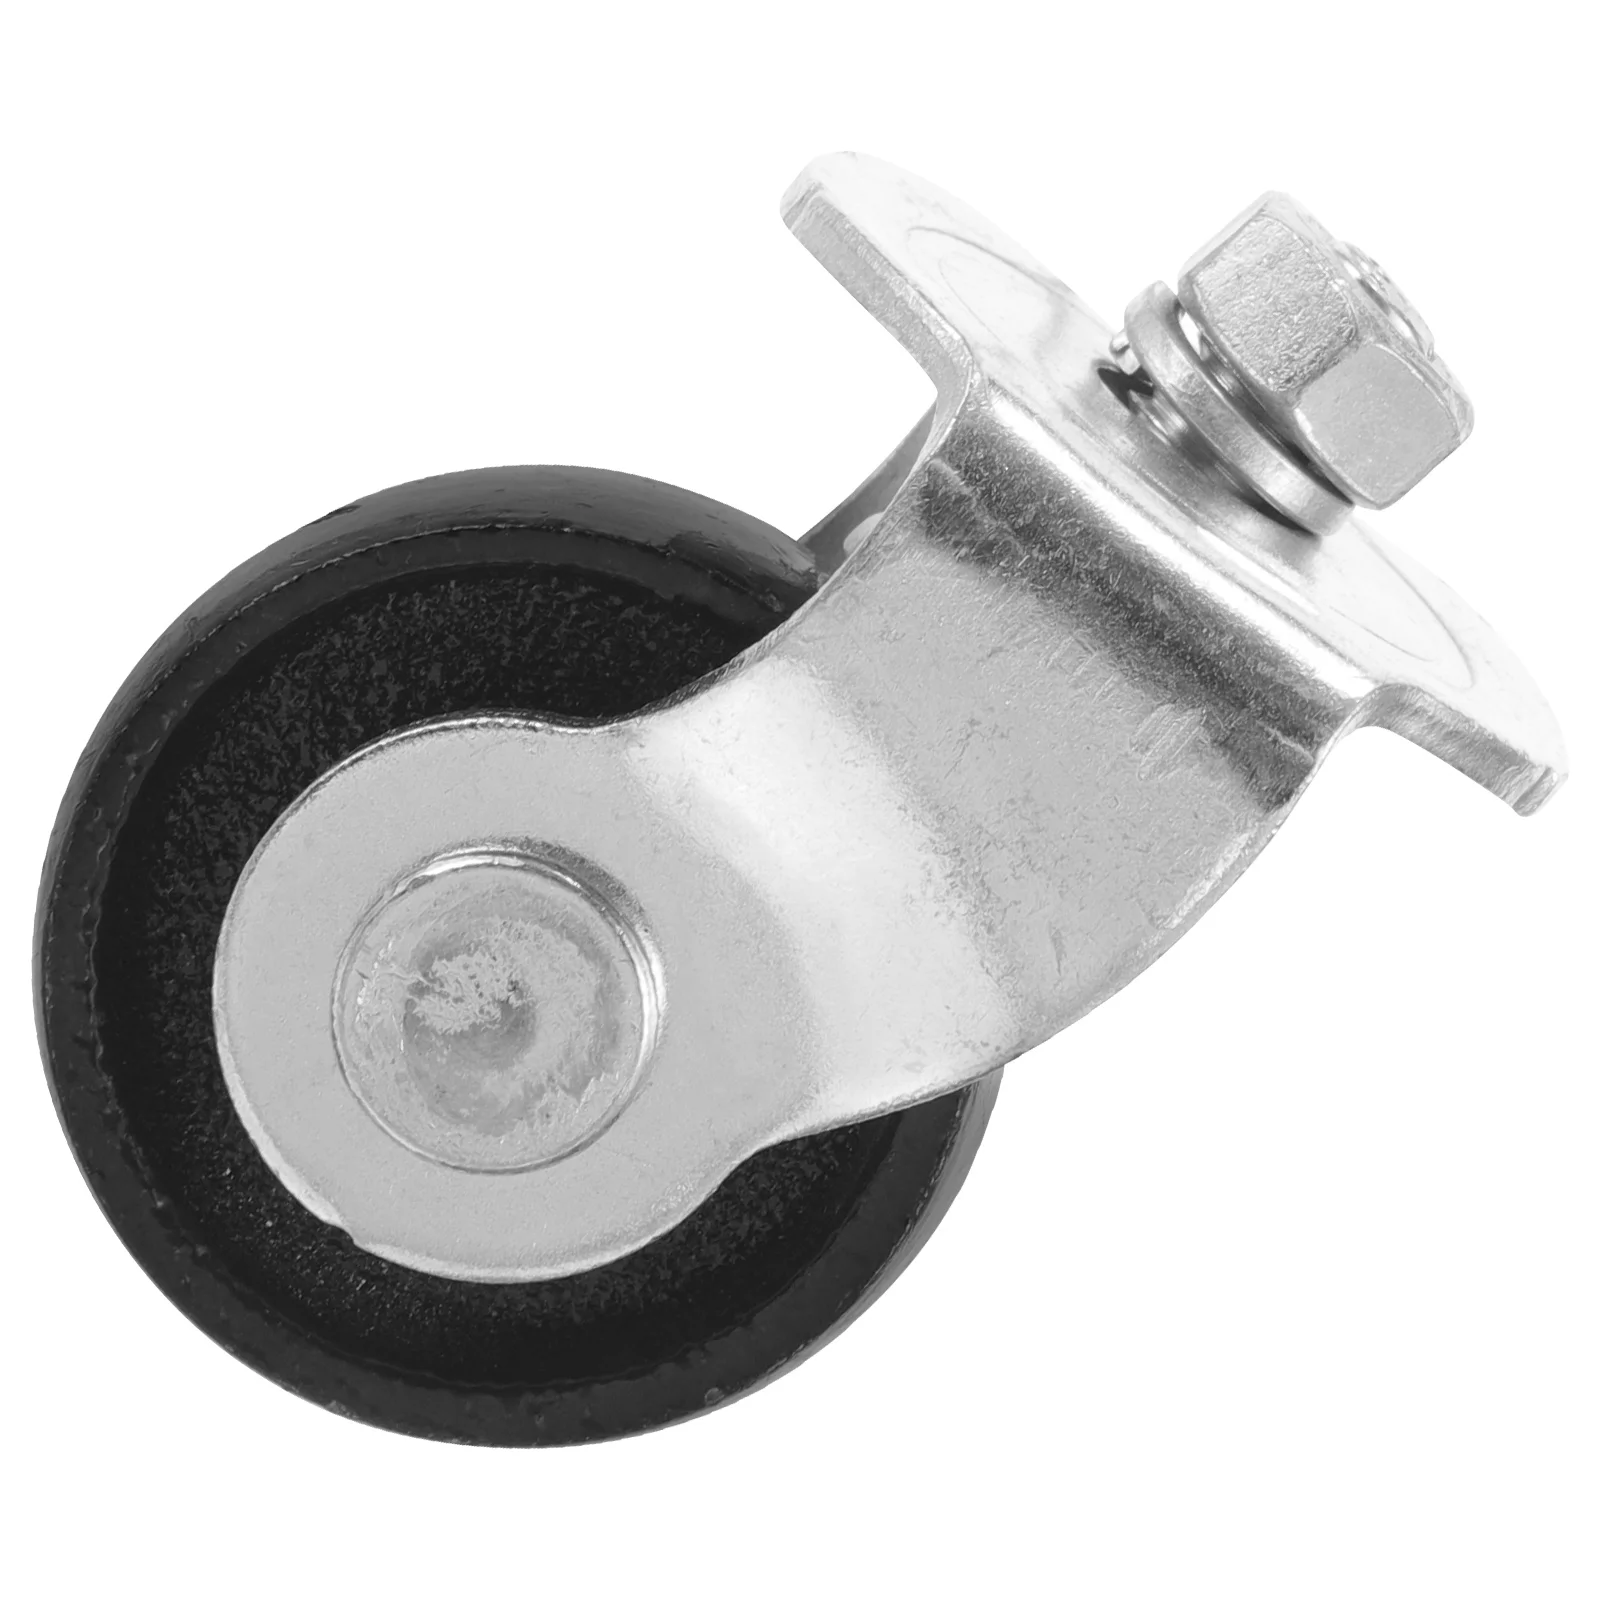 

Castors Horizontal Jack Casters Heavy Duty Floor Wheels Hydraulic Fall The Ground Car Accessories Replacement 2 Ton